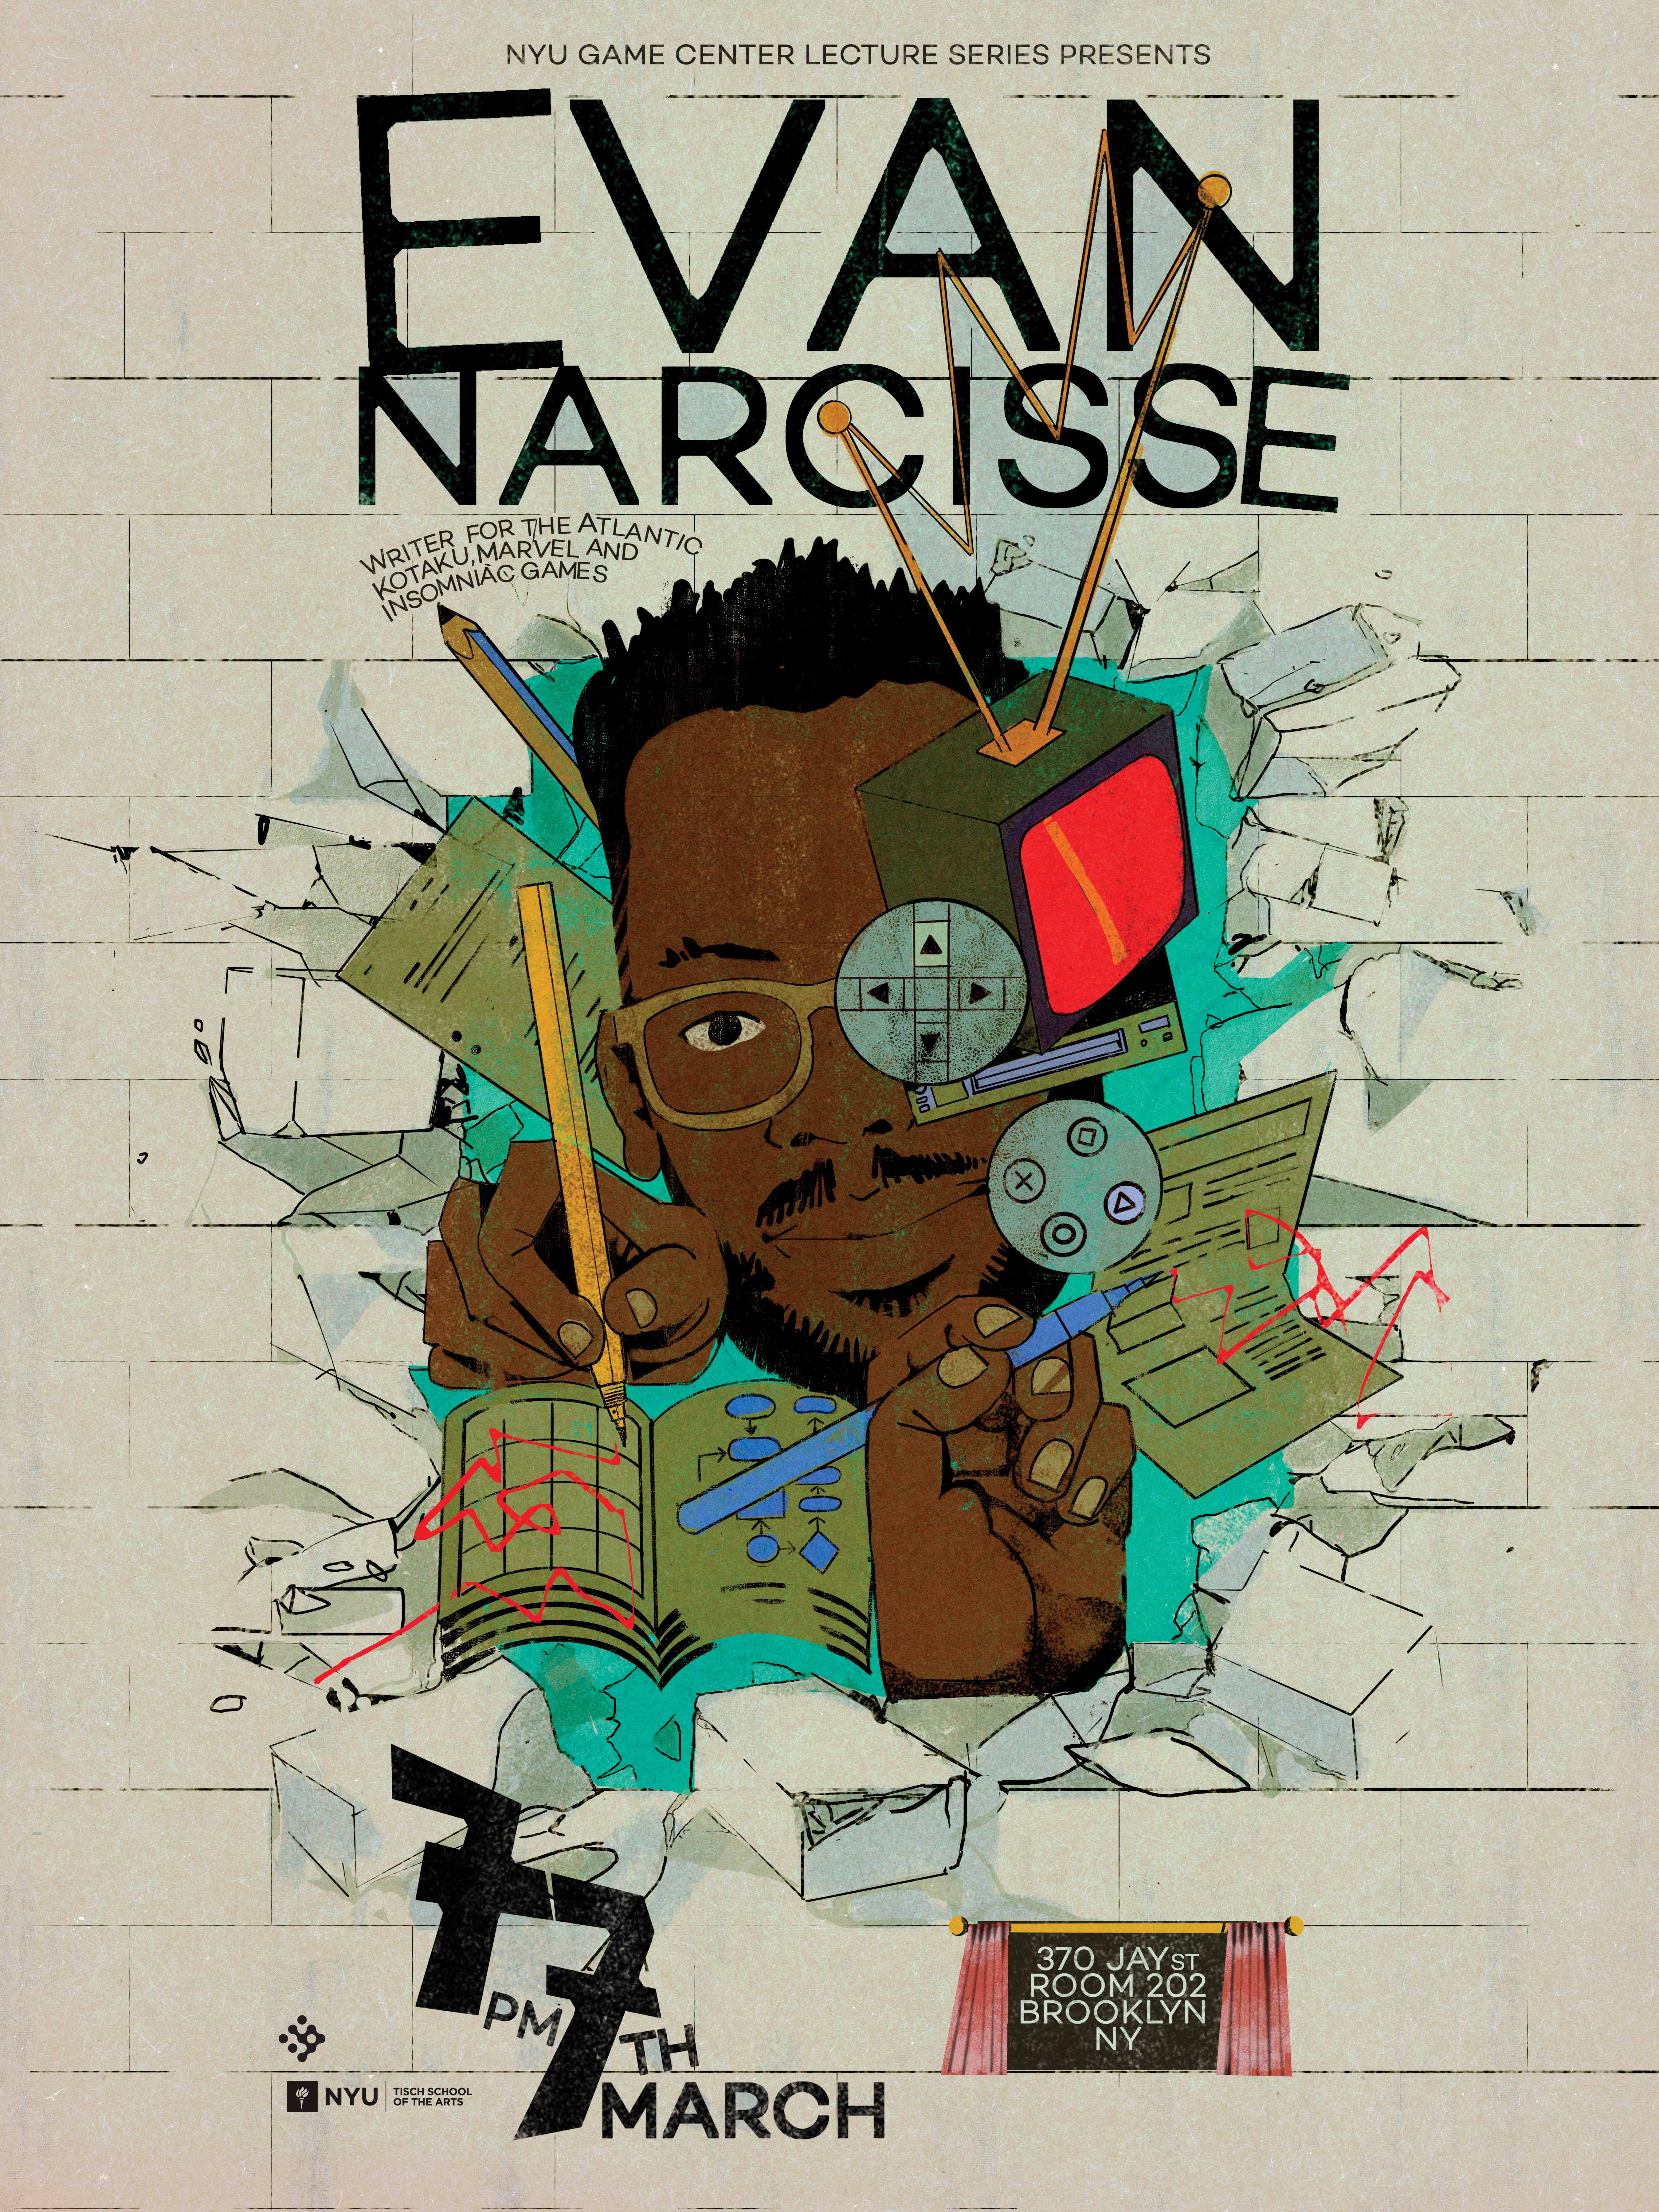 Poster for Evan Narcisse's lecture series talk depicting Narcisse and listing the date of the event.